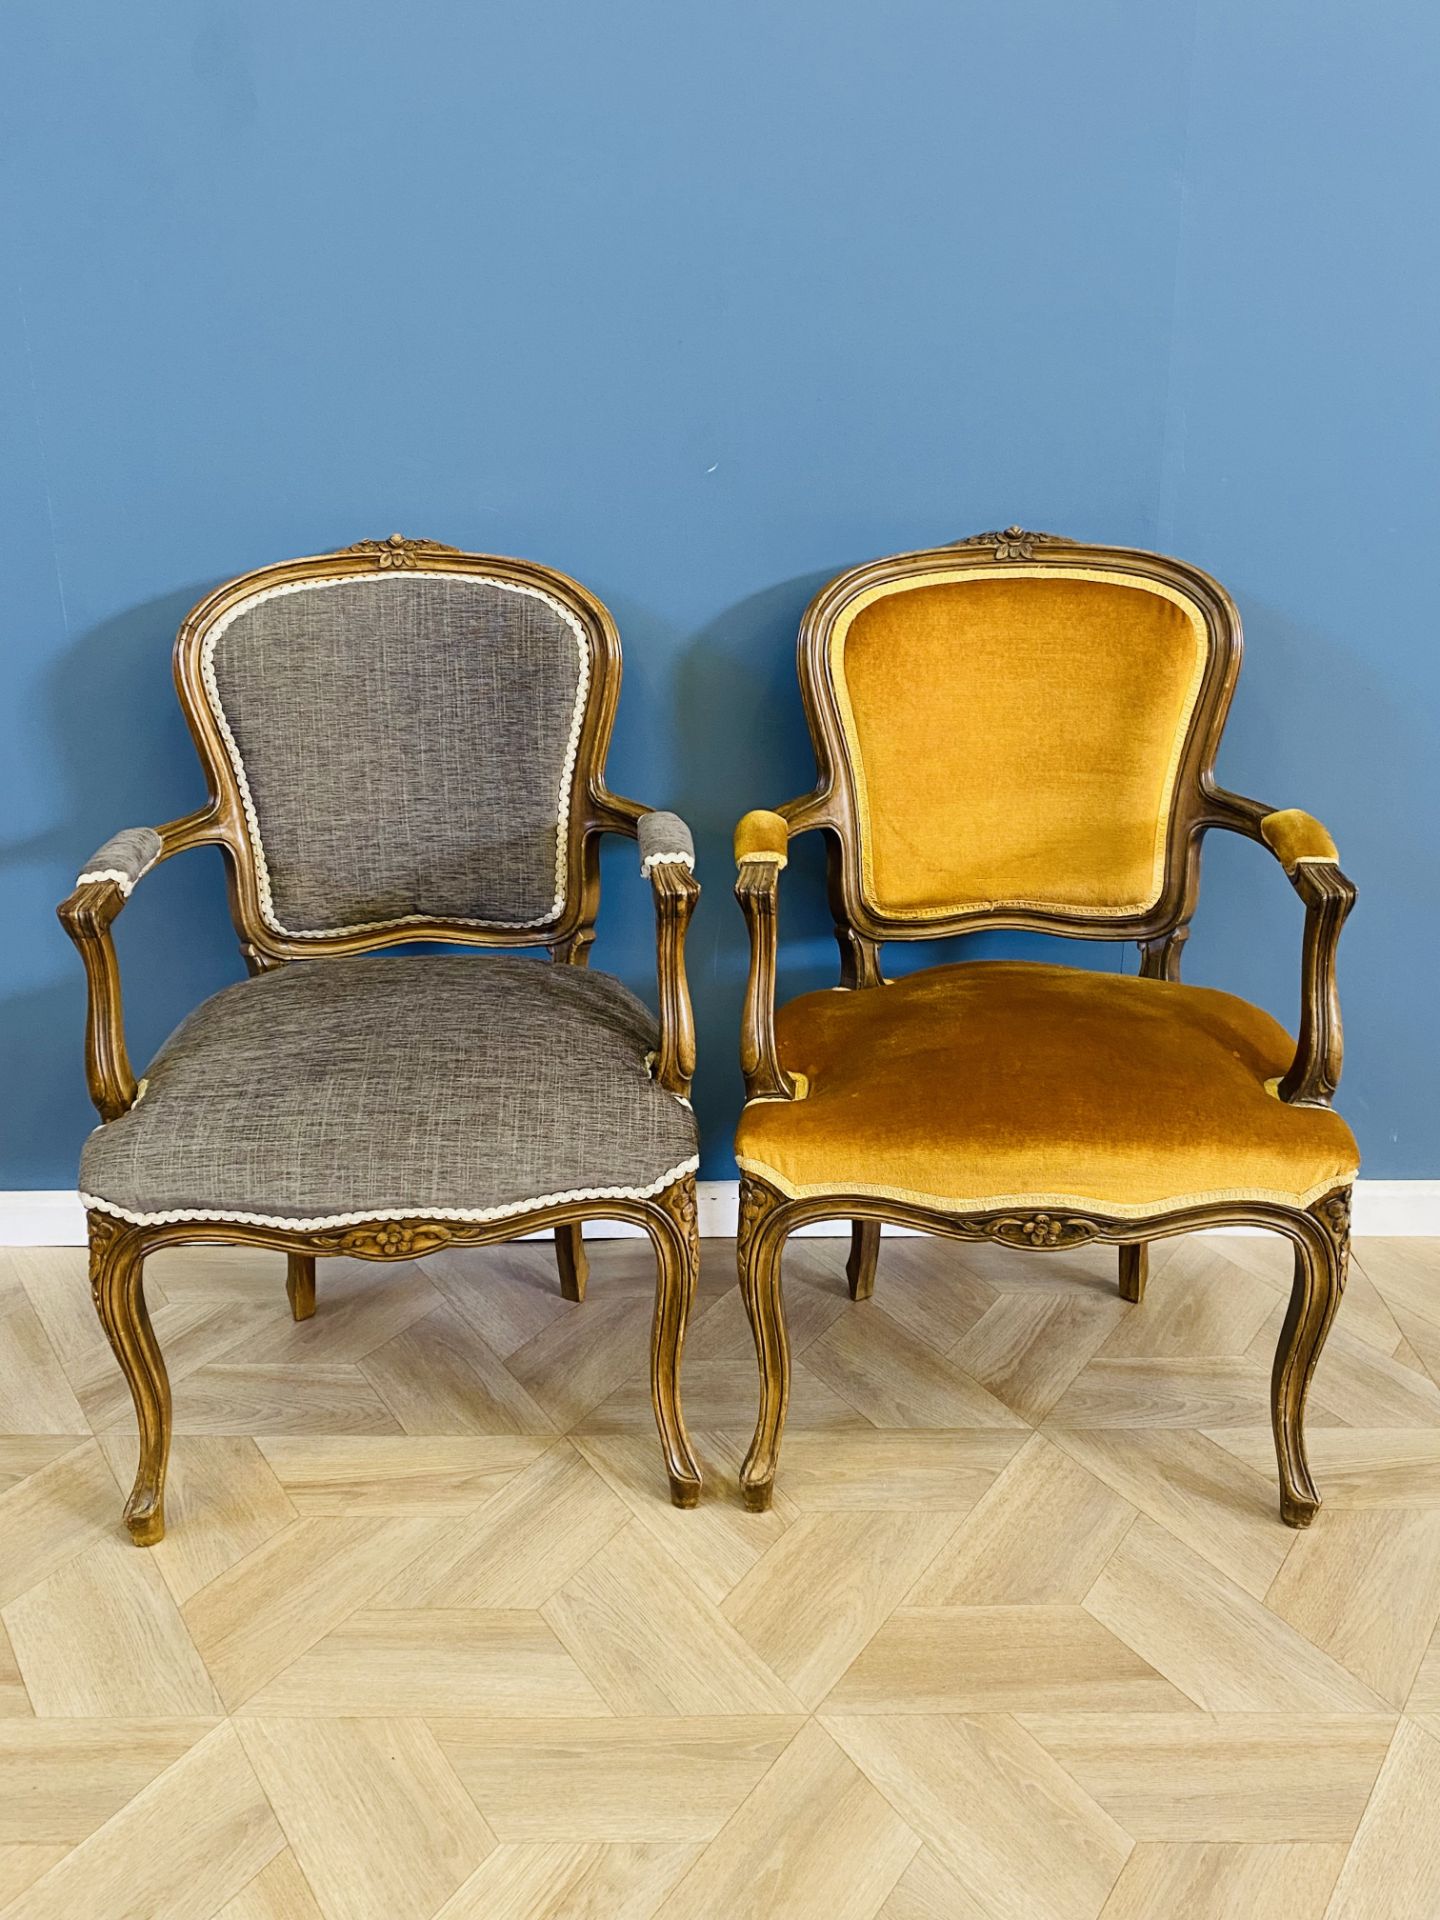 Pair of French style elbow chairs - Image 2 of 8